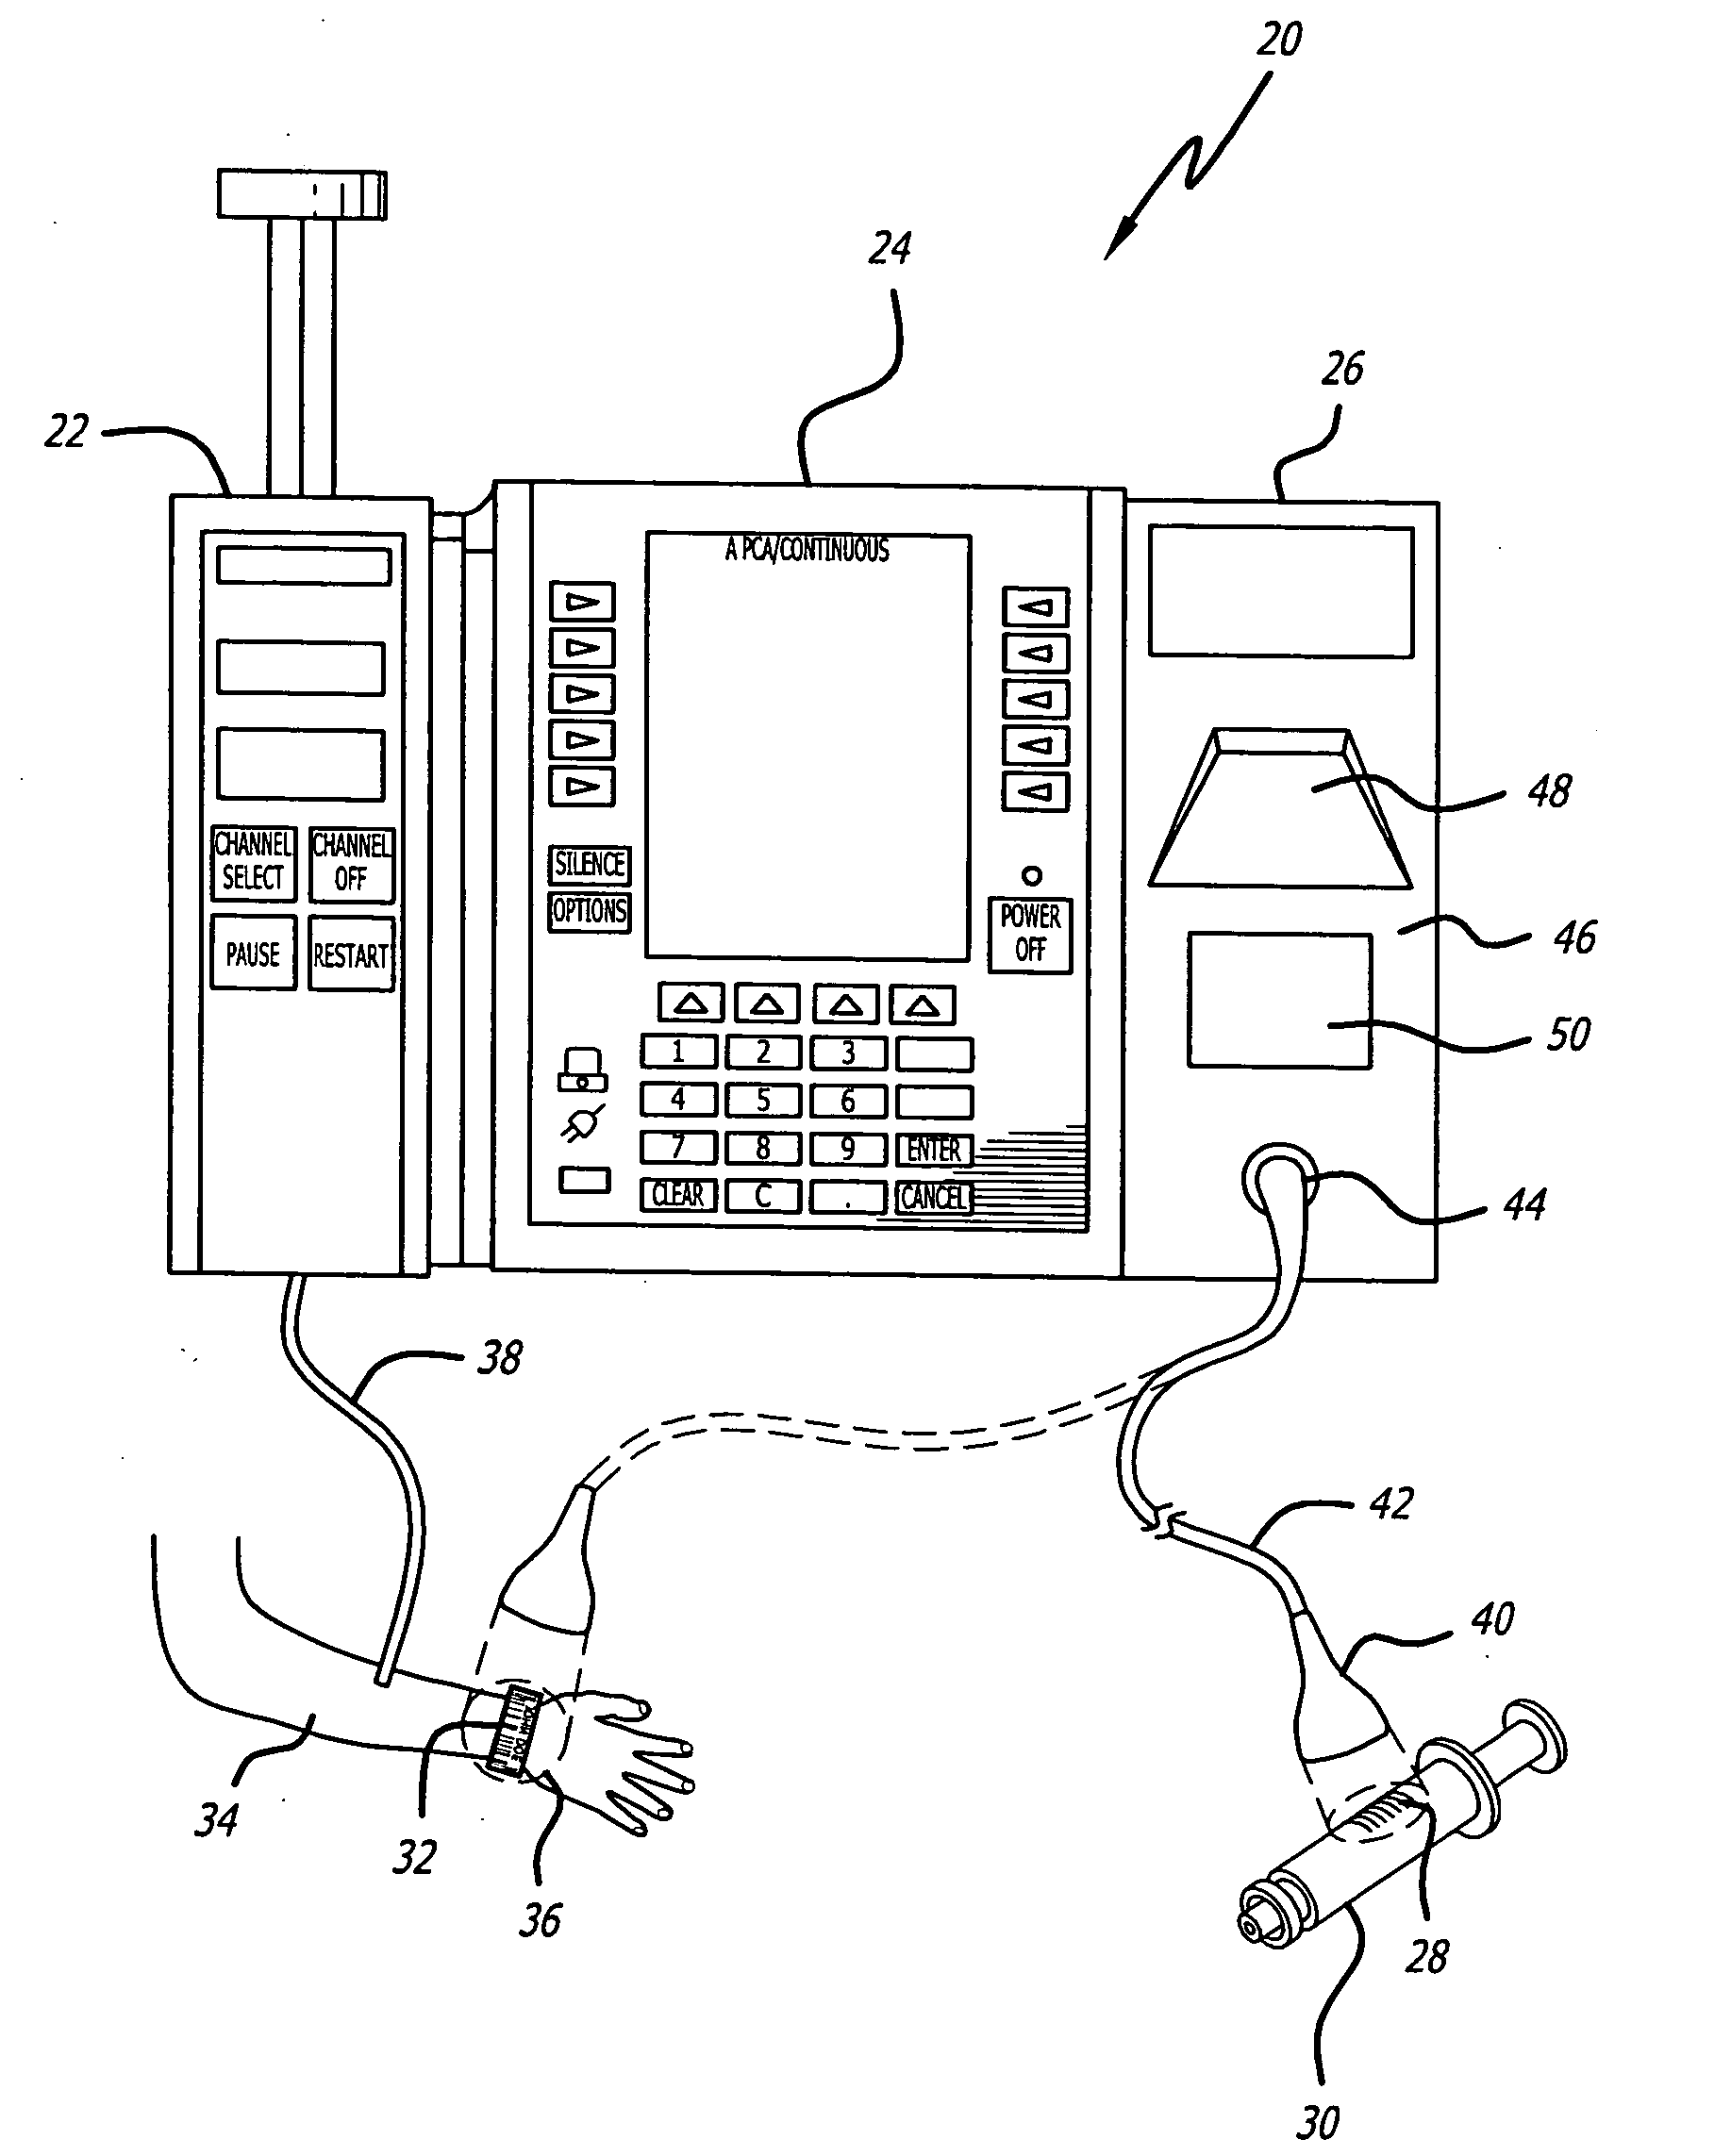 Identification system and method for medication management